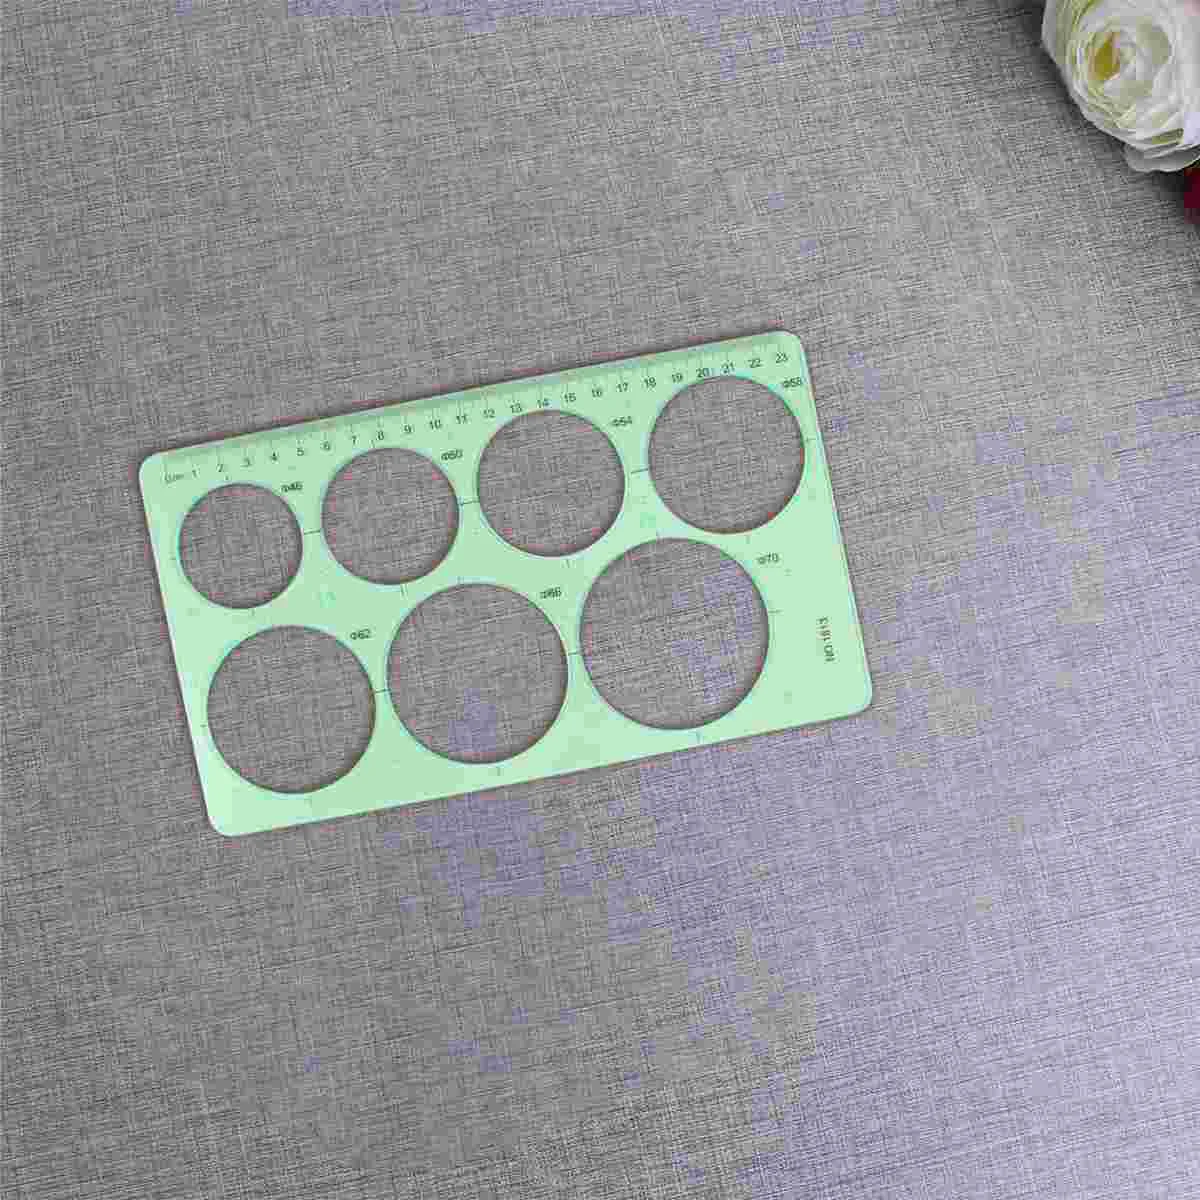 

Circle Templates Drawing Measuring Tool Template Stencil Drawings Rulers Architecture Shapes Buliding Plastic Geometric Maker